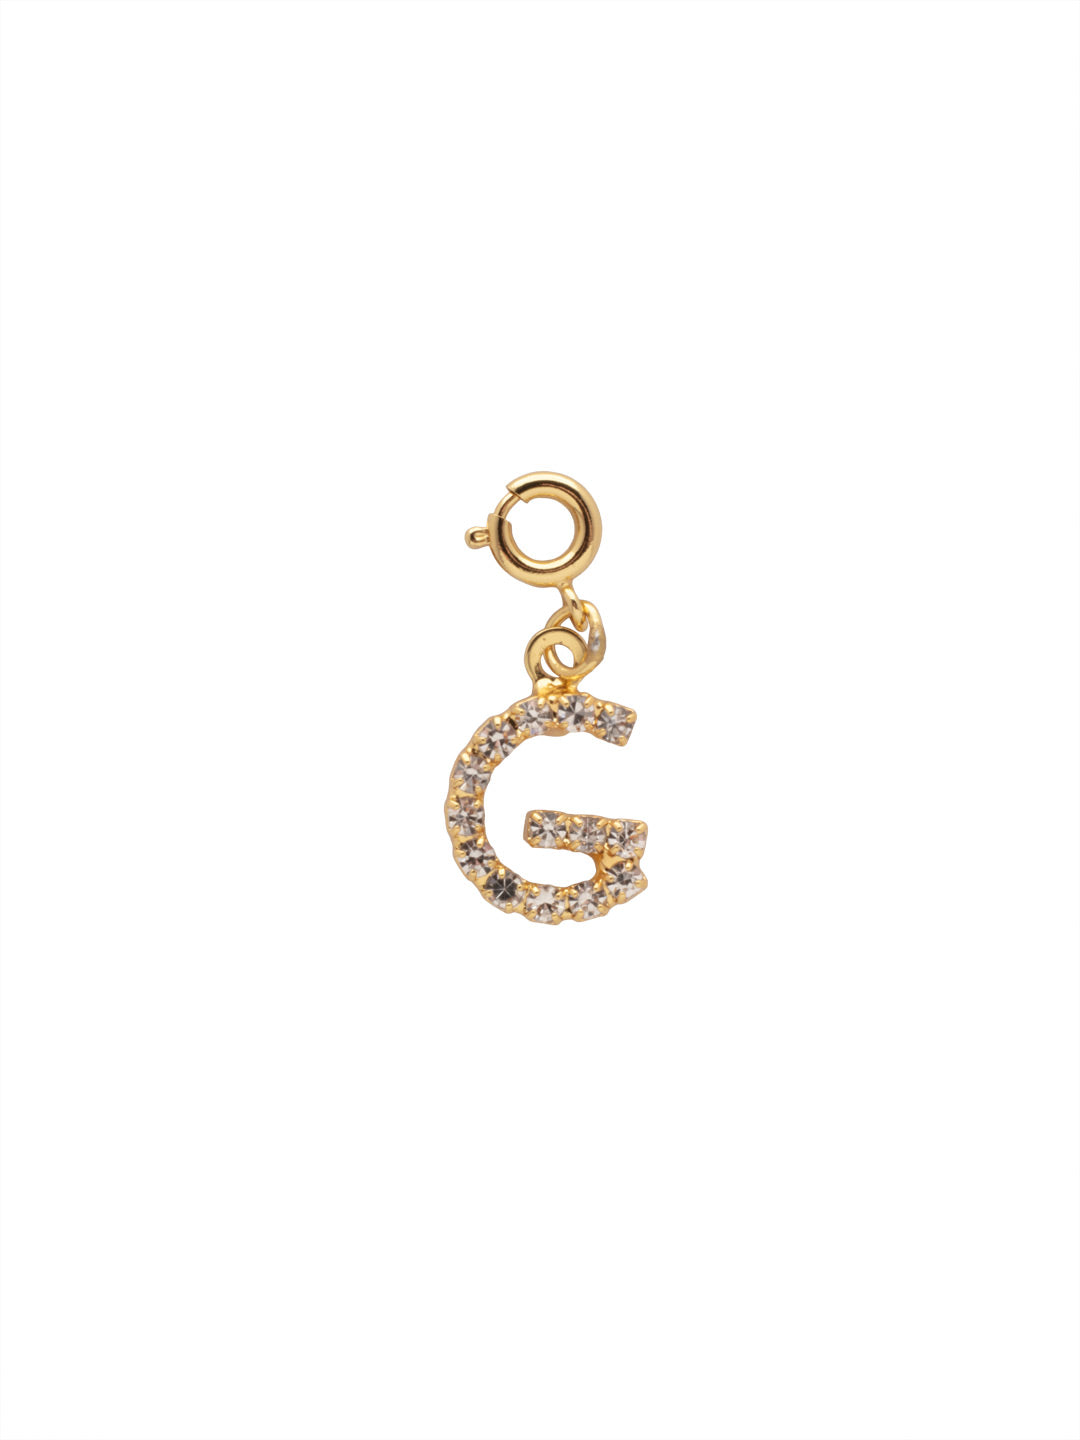 "G" Initial Charm - CFB7BGCRY - <p>The Initial Charm features a metal letter embellished with small round crystals and a small spring ring clasp. From Sorrelli's Crystal collection in our Bright Gold-tone finish.</p>